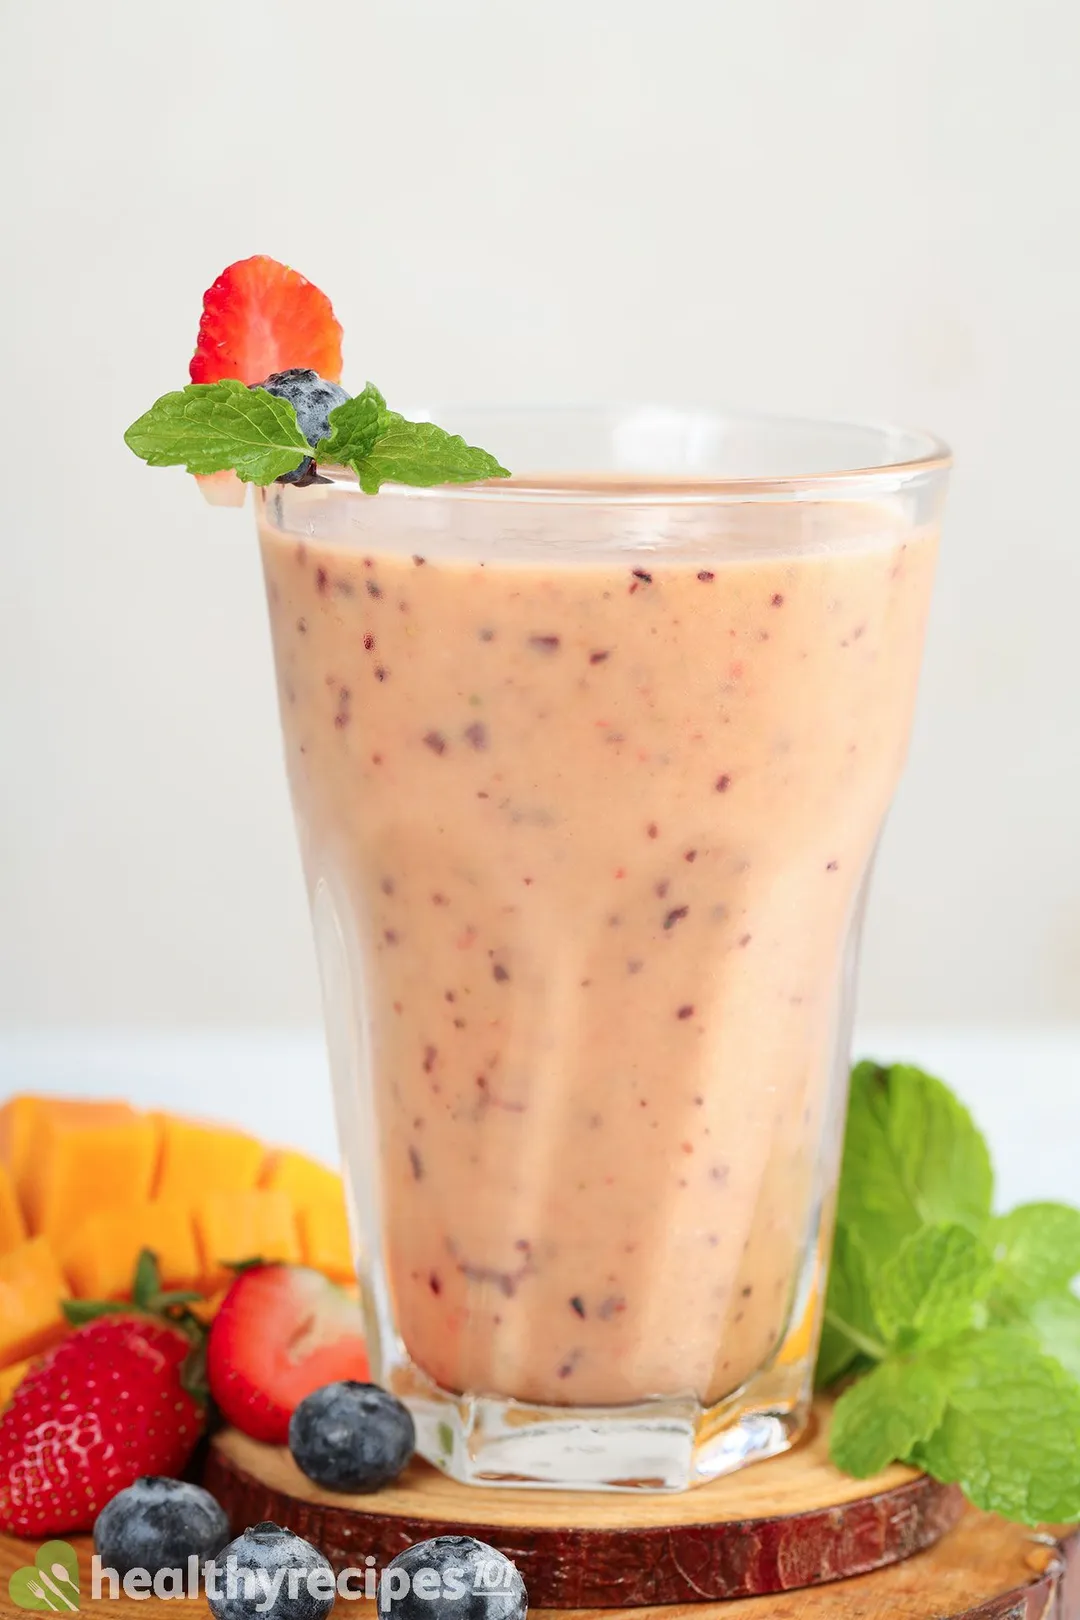 A glass of Mango Berry Smoothie placed on a wooden board near blueberries, strawberries, mint leaves, and a scored mango.